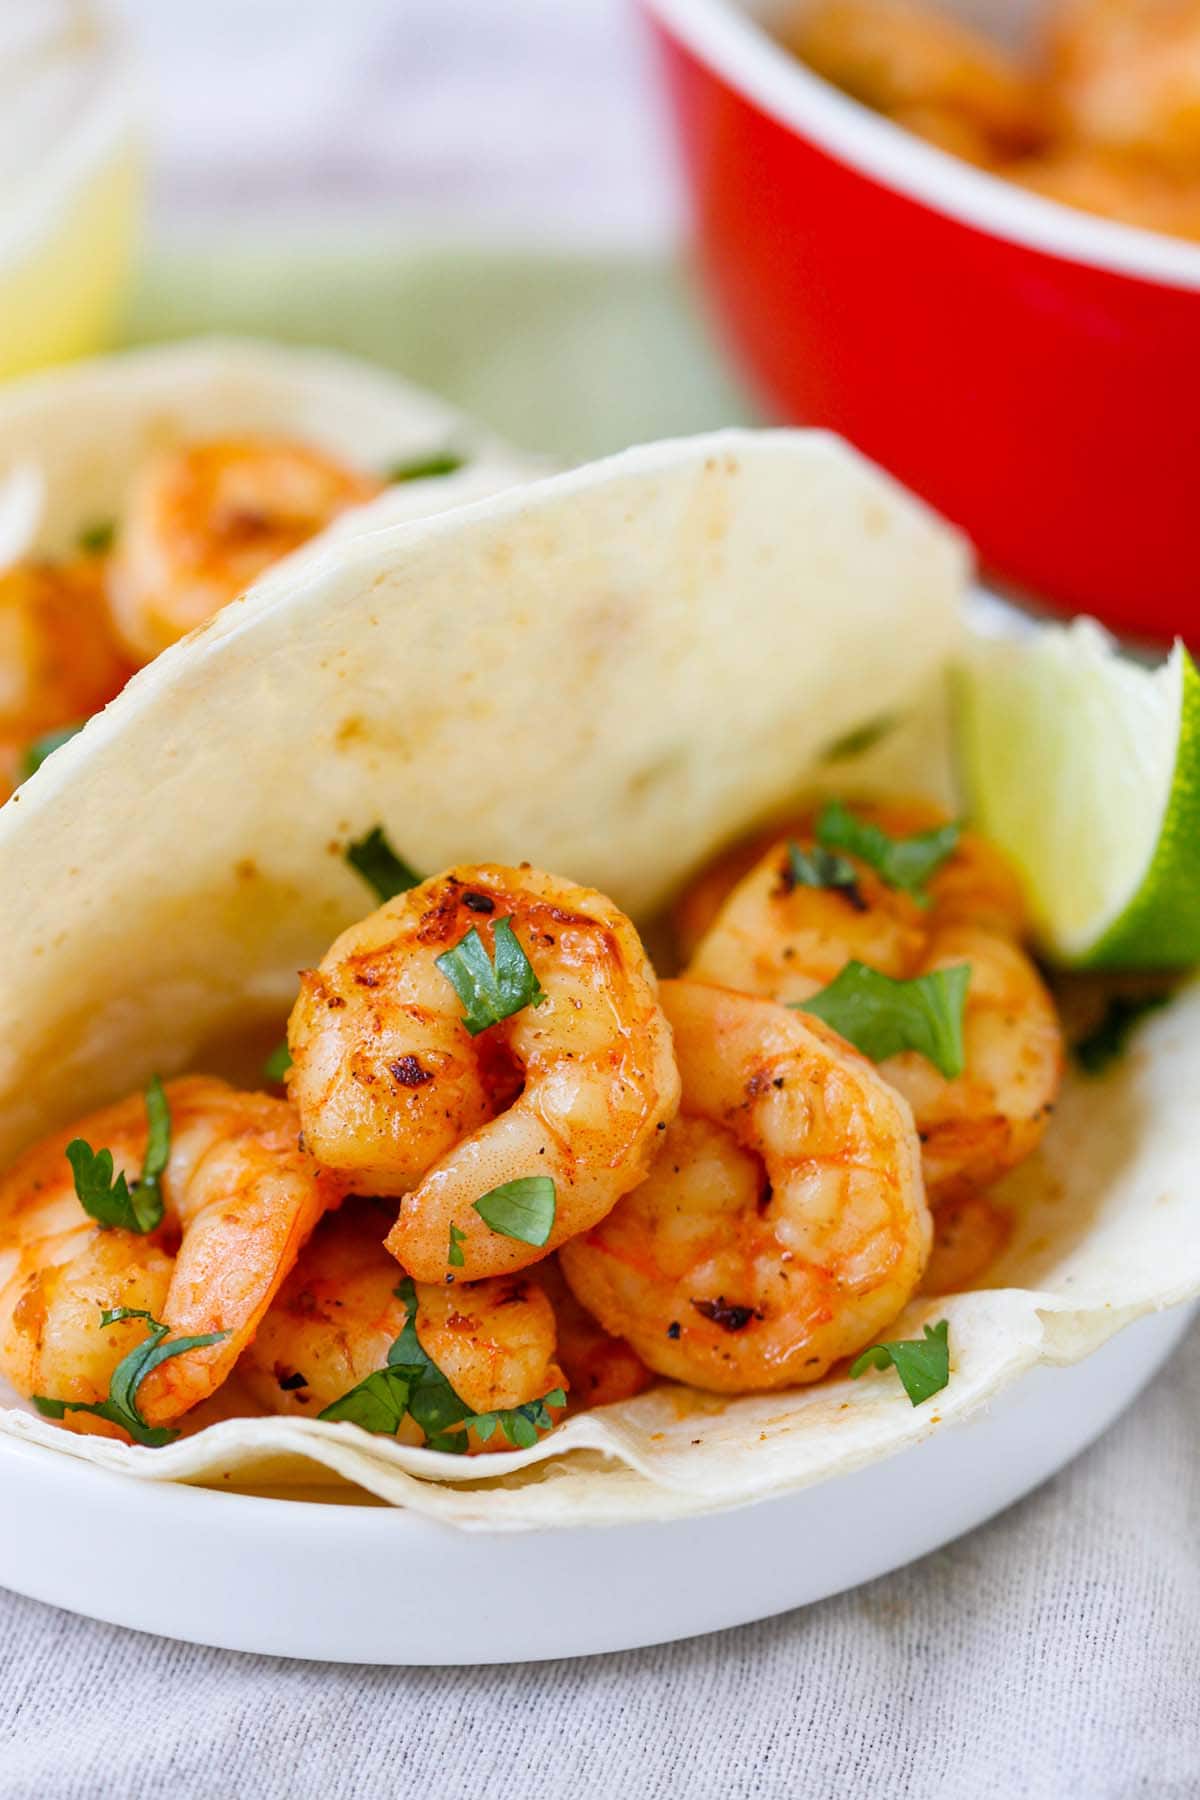 Mexican Tequila Lime Shrimp wrapped in tortillas ready to serve as tequila lime shrimp tacos.